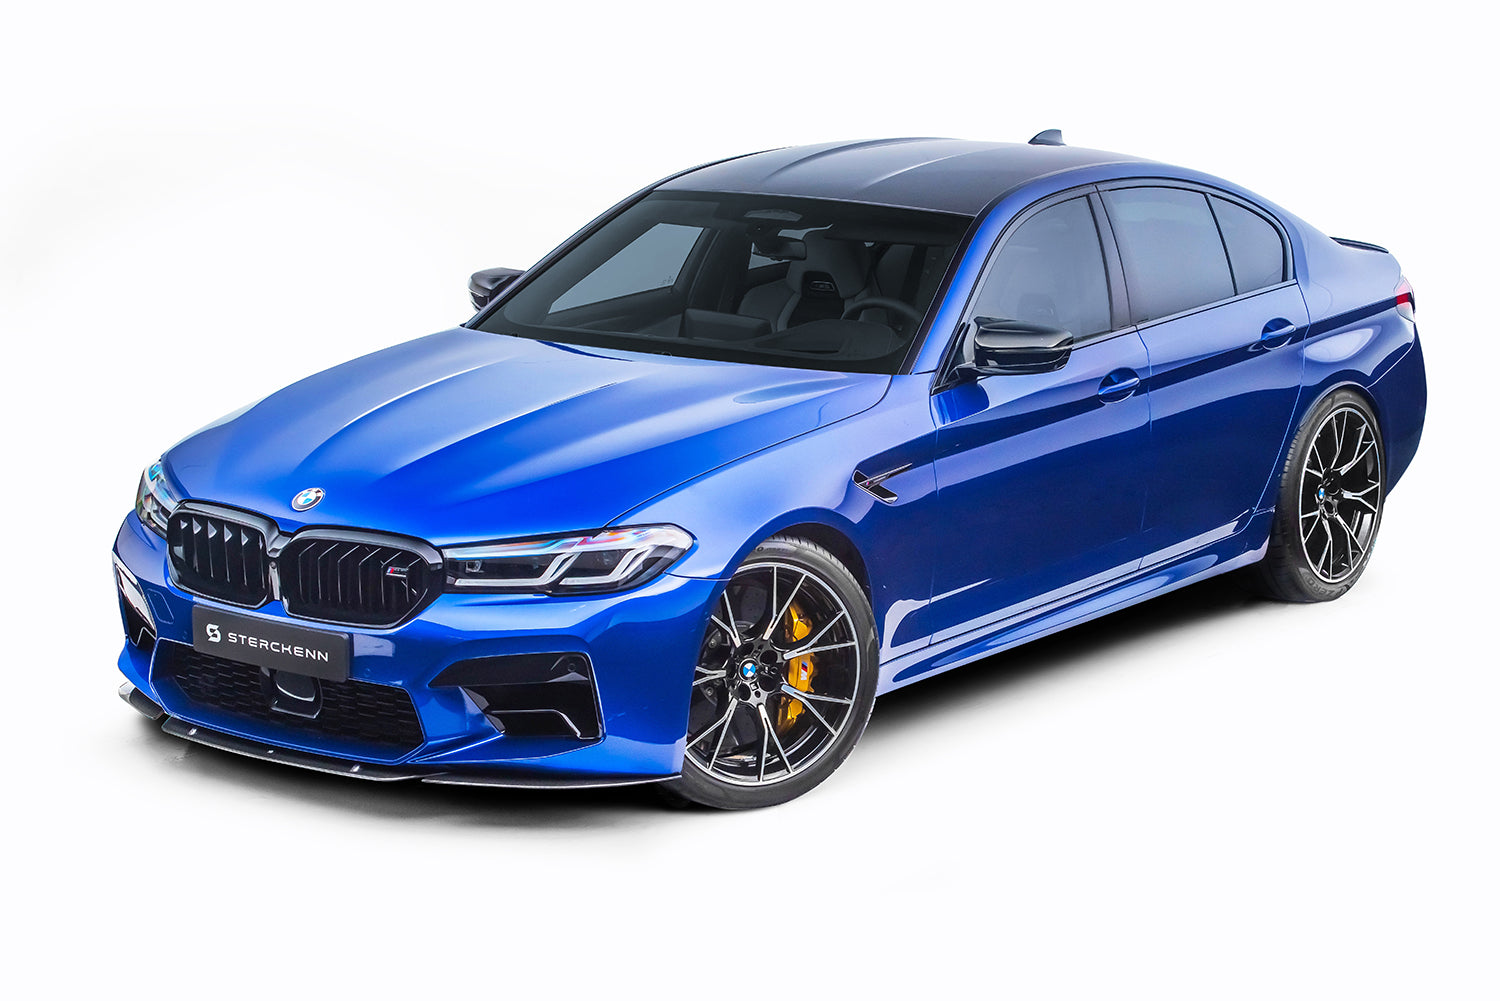 Side view of the blue BMW M5 (F90) LCI on a white background